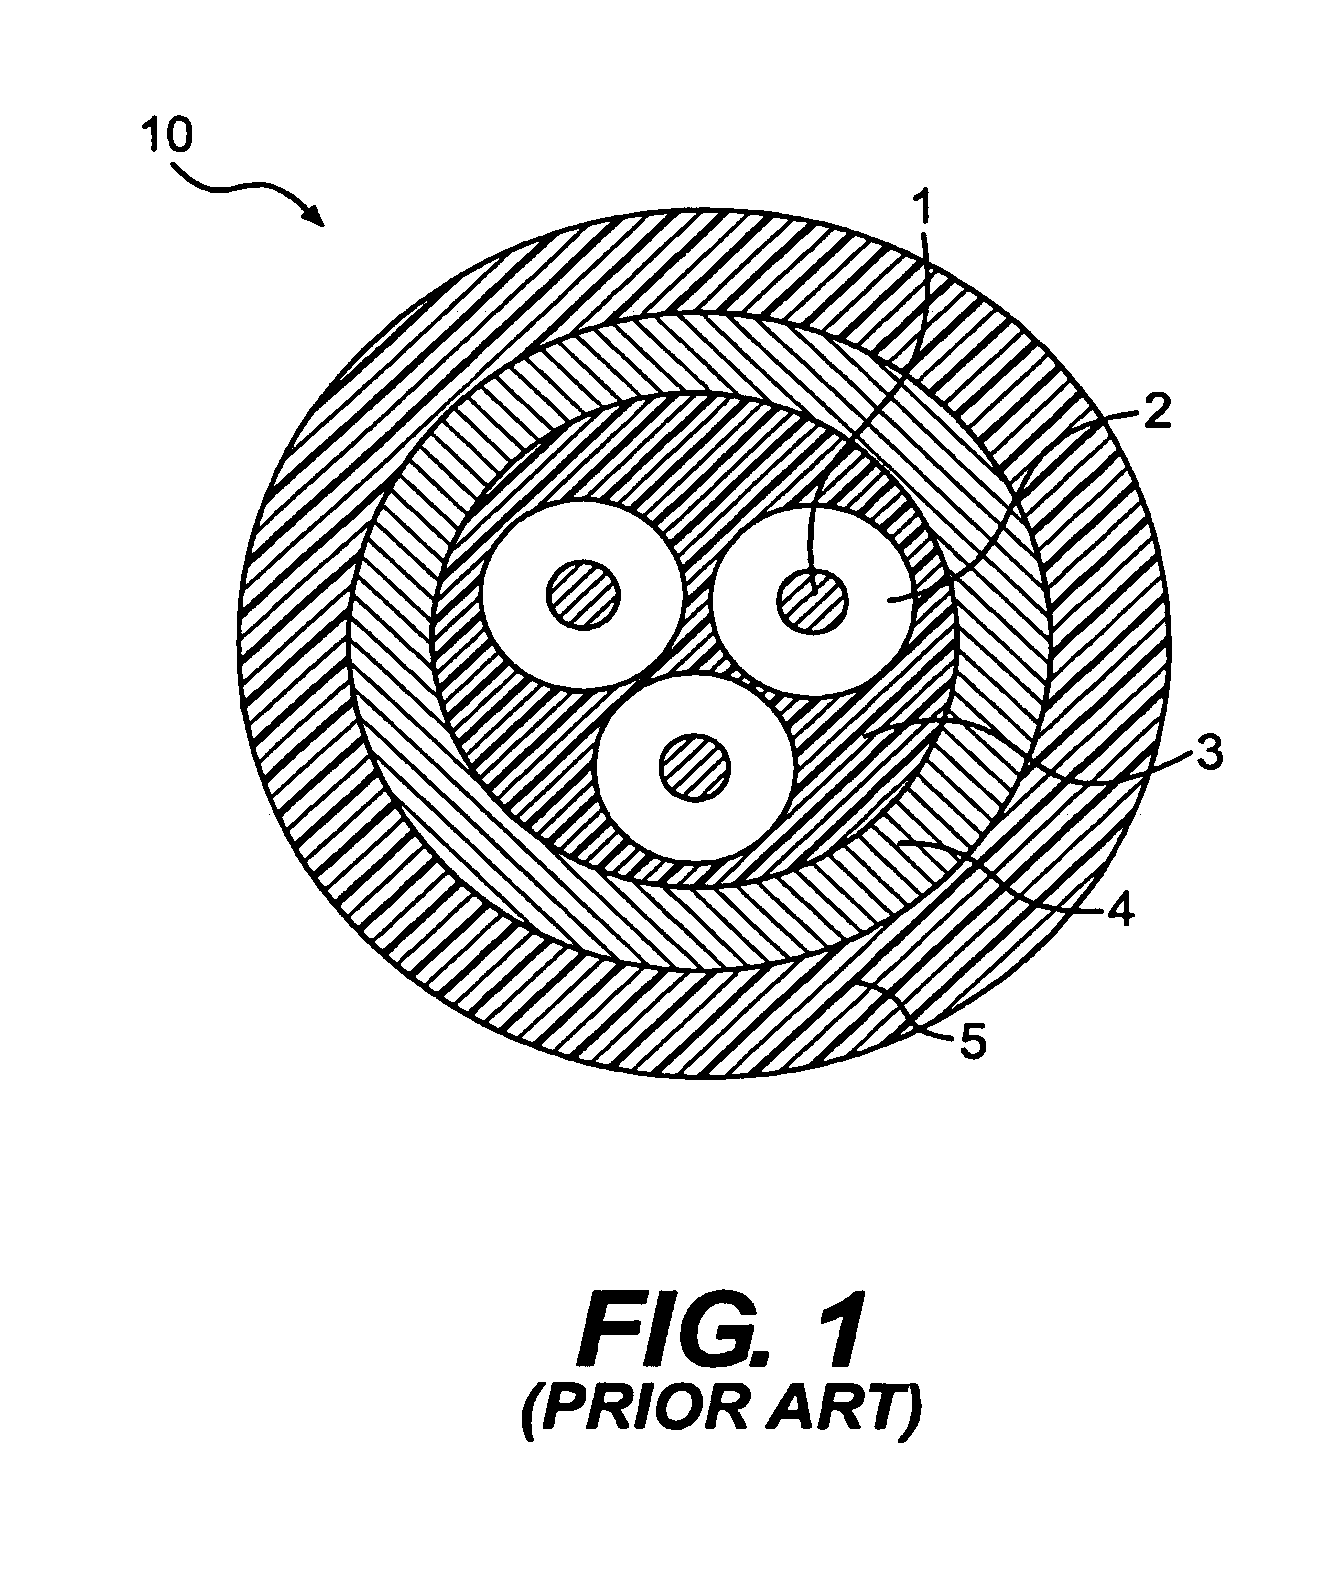 Impact-resistant self-extinguishing cable